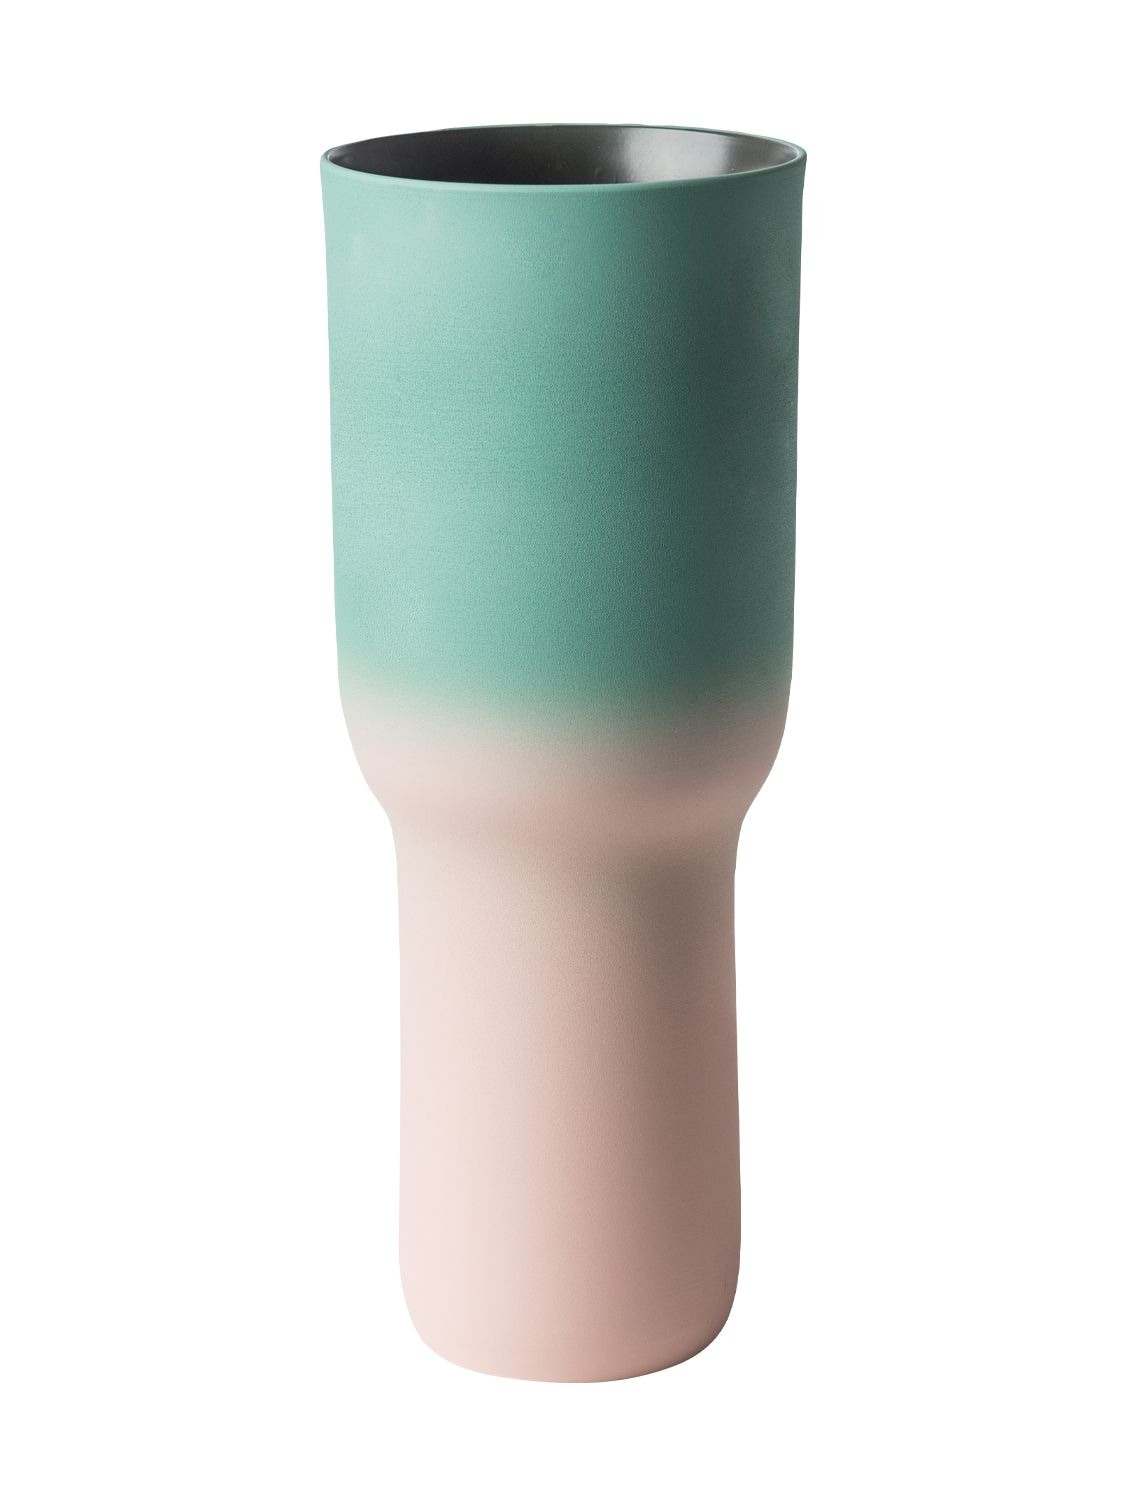 Image of Sherbet Small Green & Pink Vase